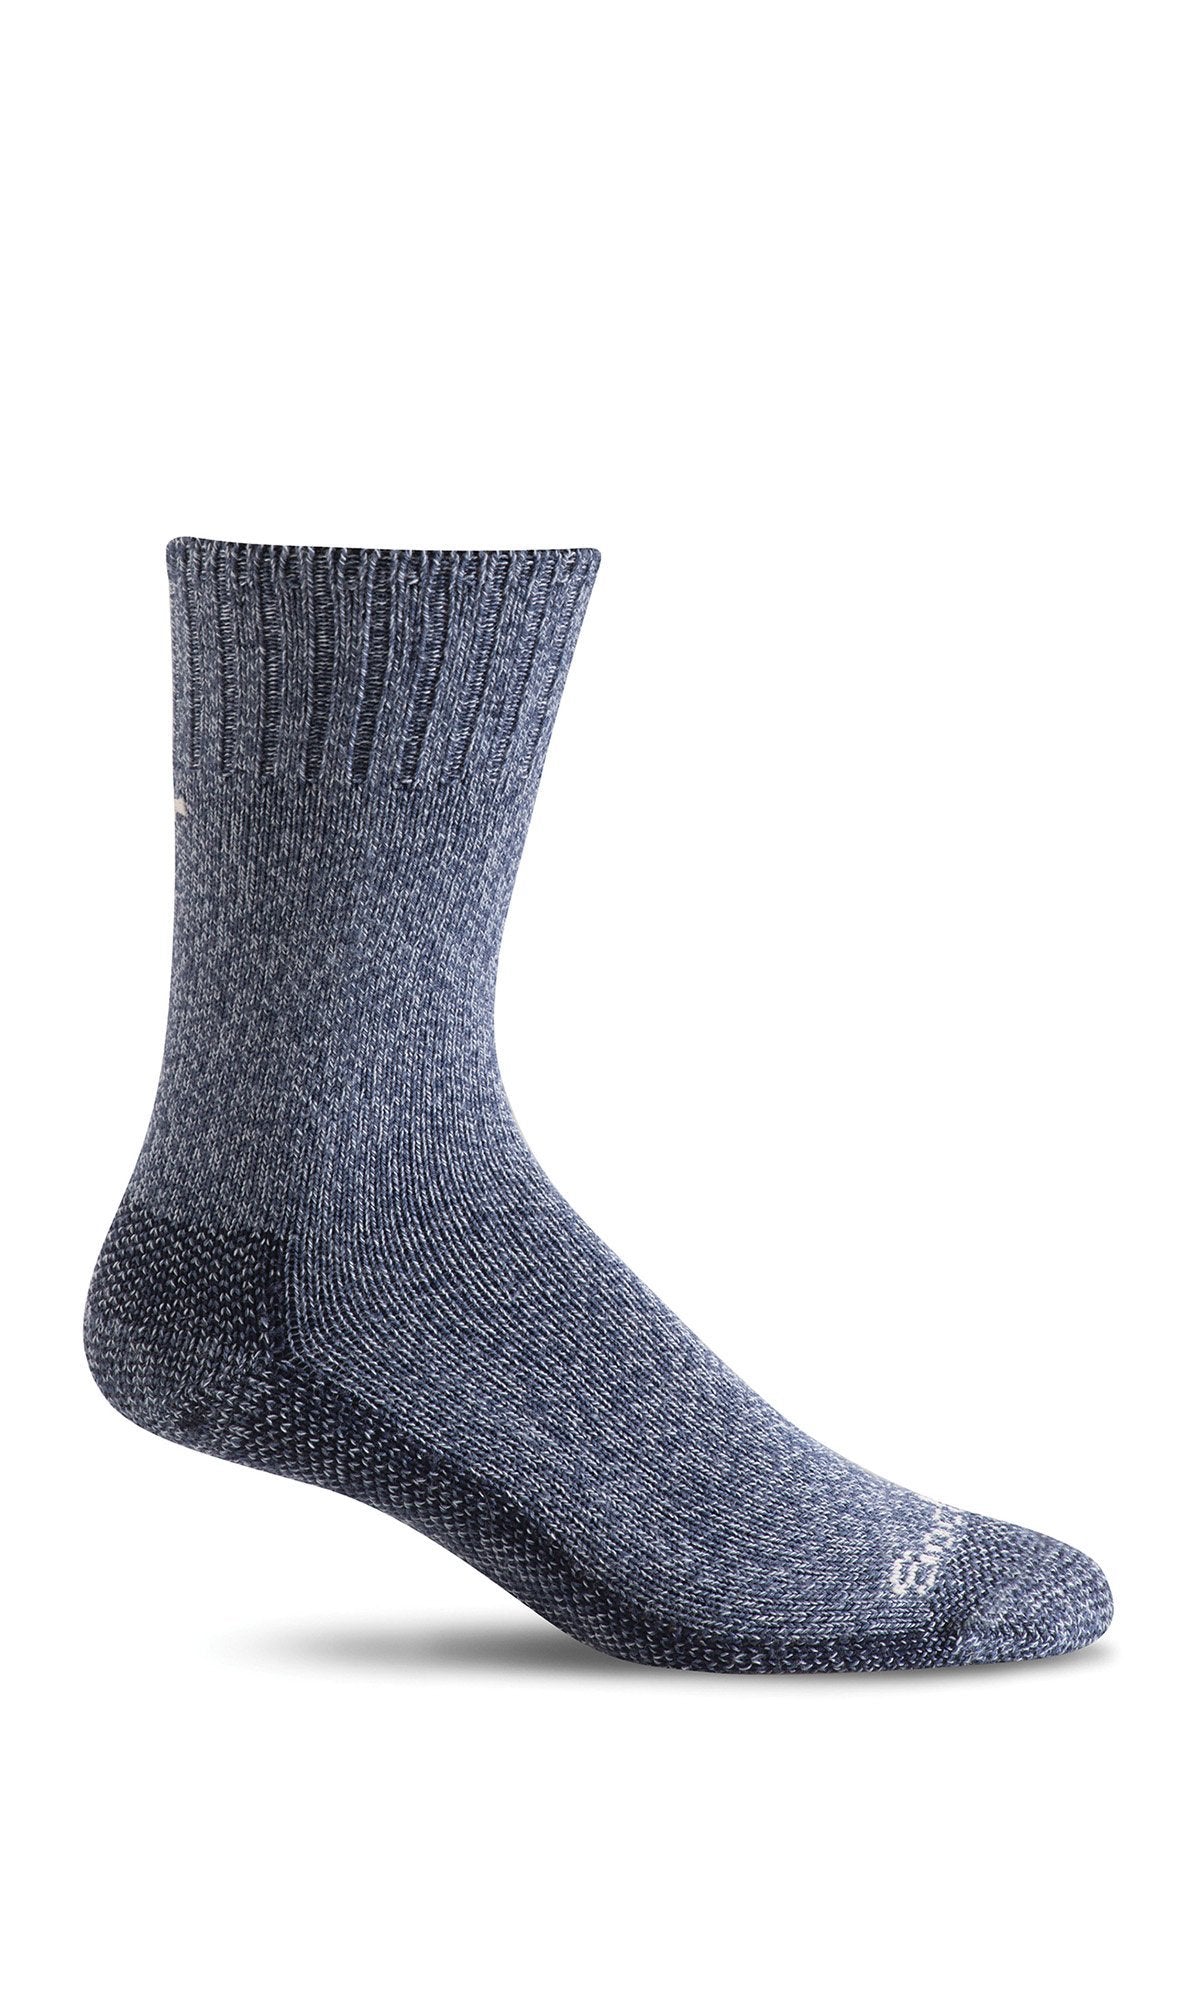 Pamper and protect your feet in Sockwell's Big Easy relaxed fit non-binding diabetic-friendly merino wool socks in calming denim blues